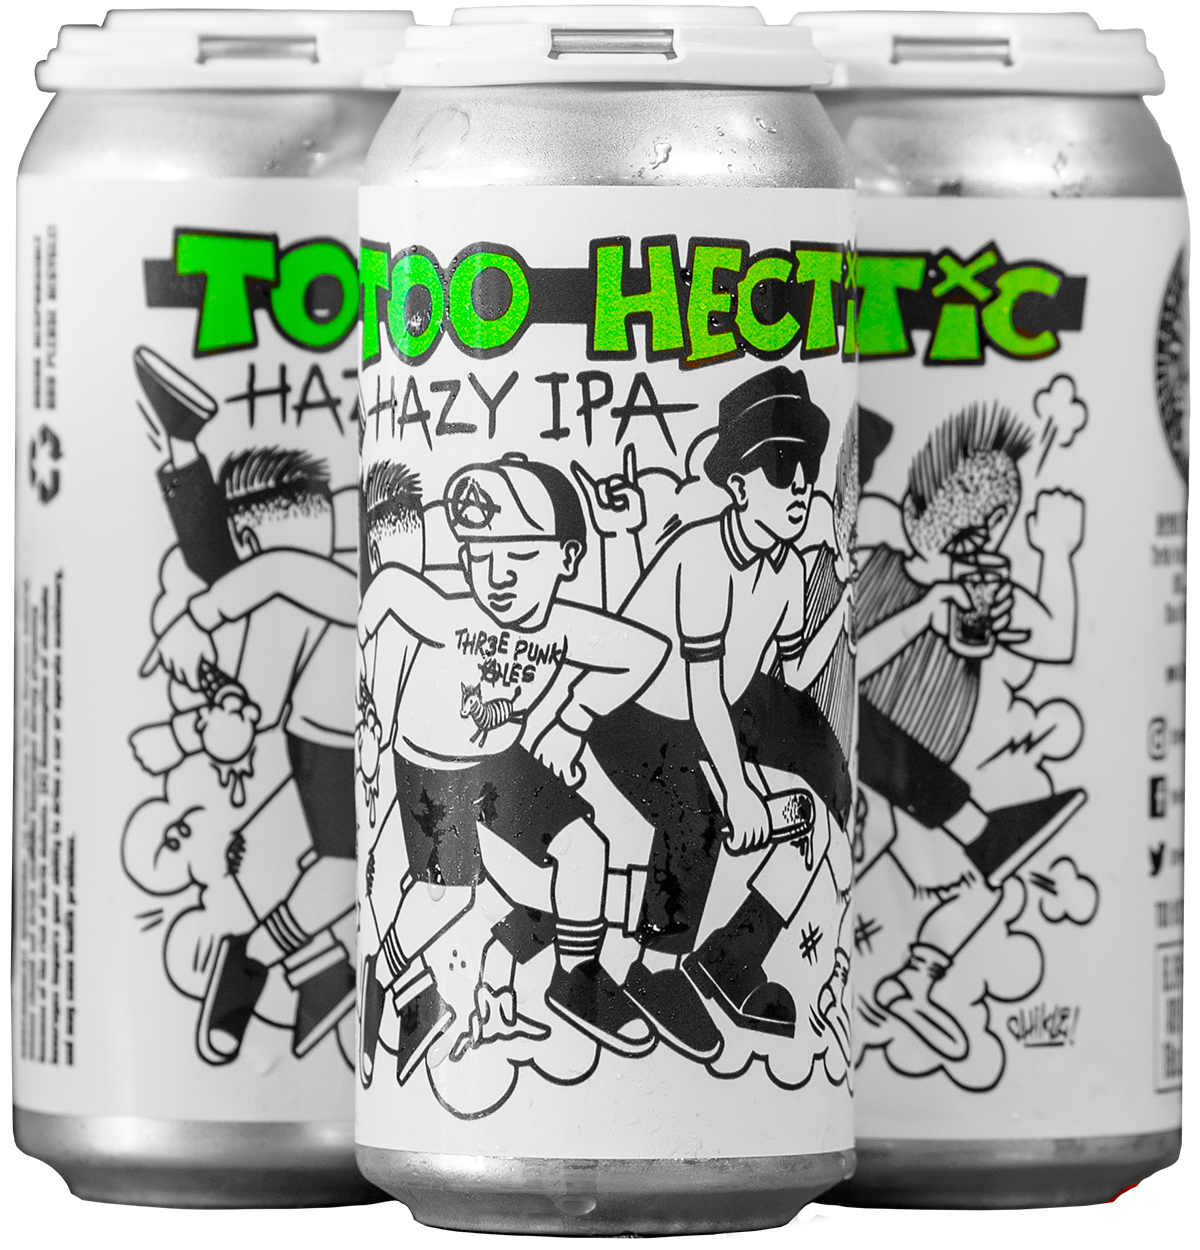 Too Hectic Cans Image